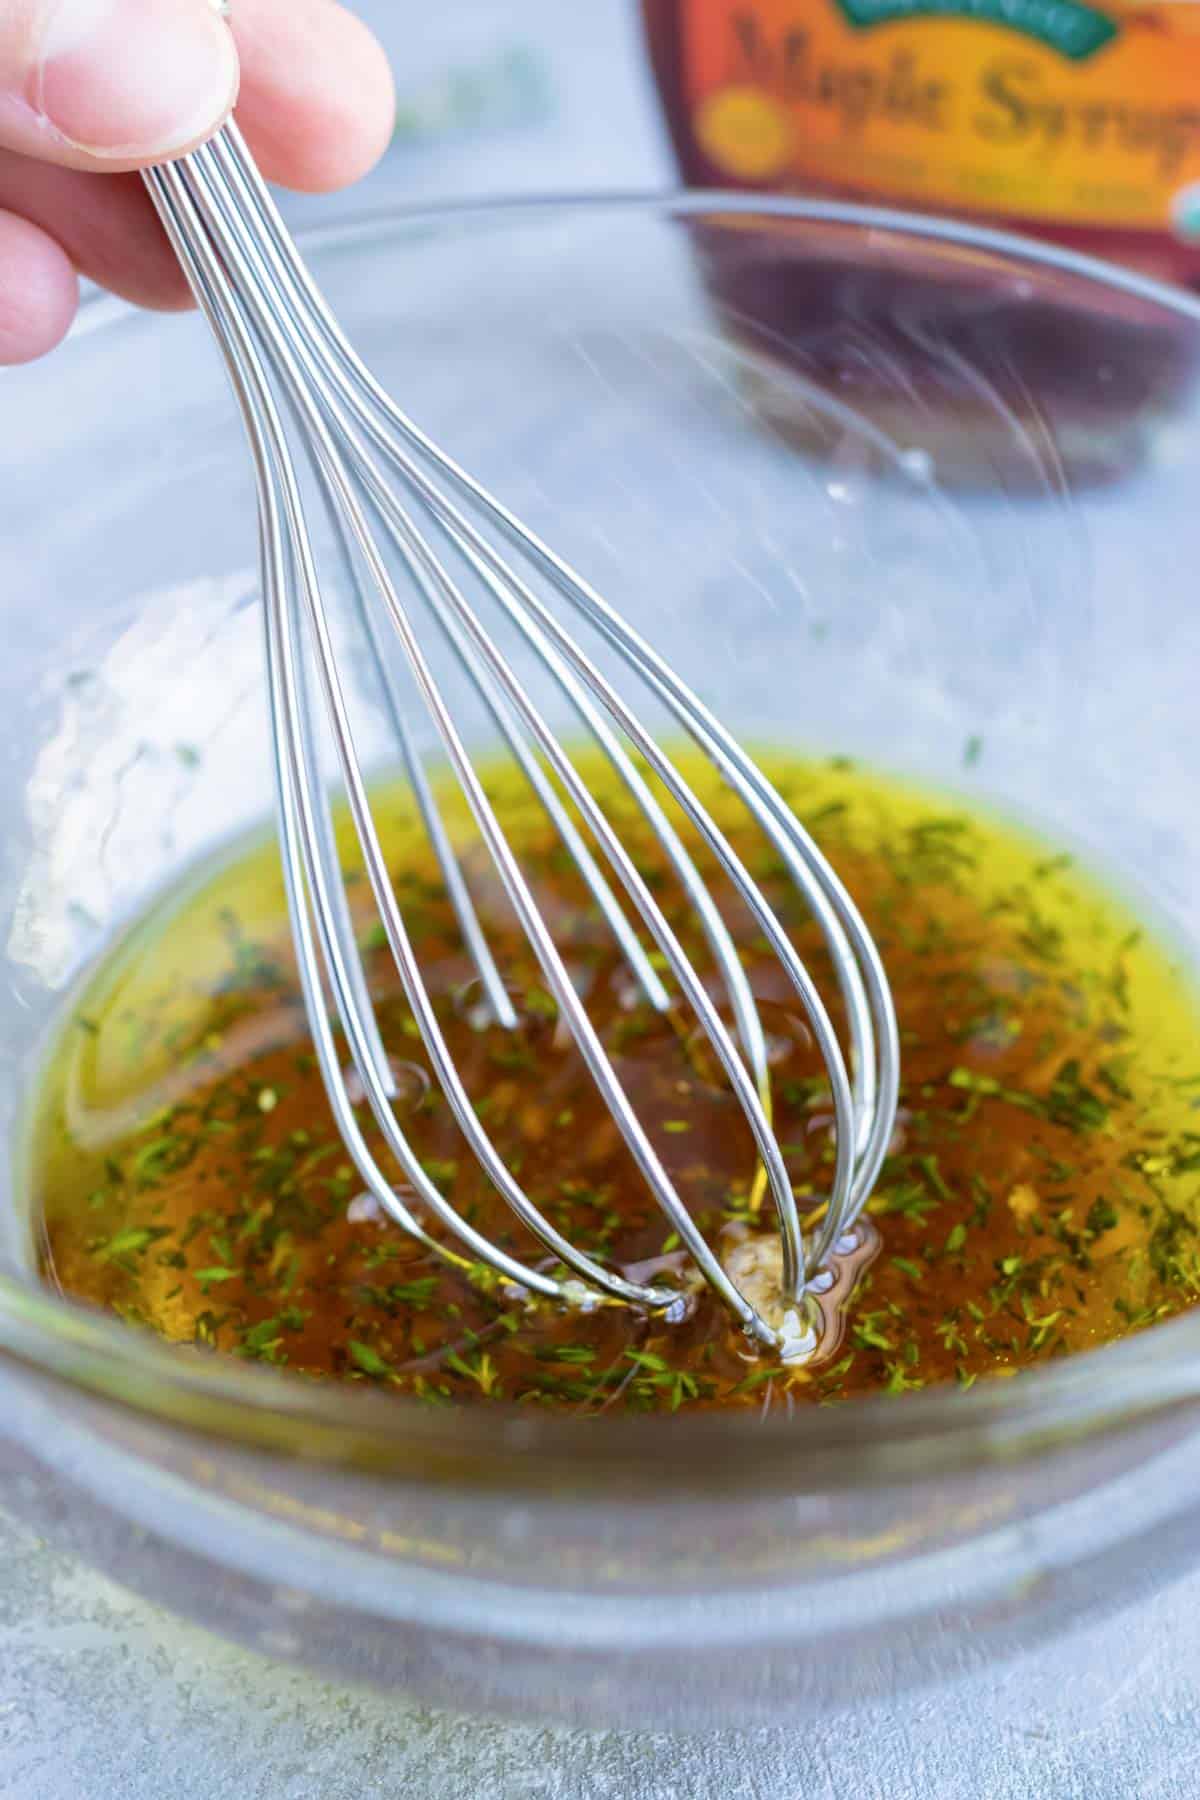 Whisking together a garlic maple and herb sauce in a small bowl.